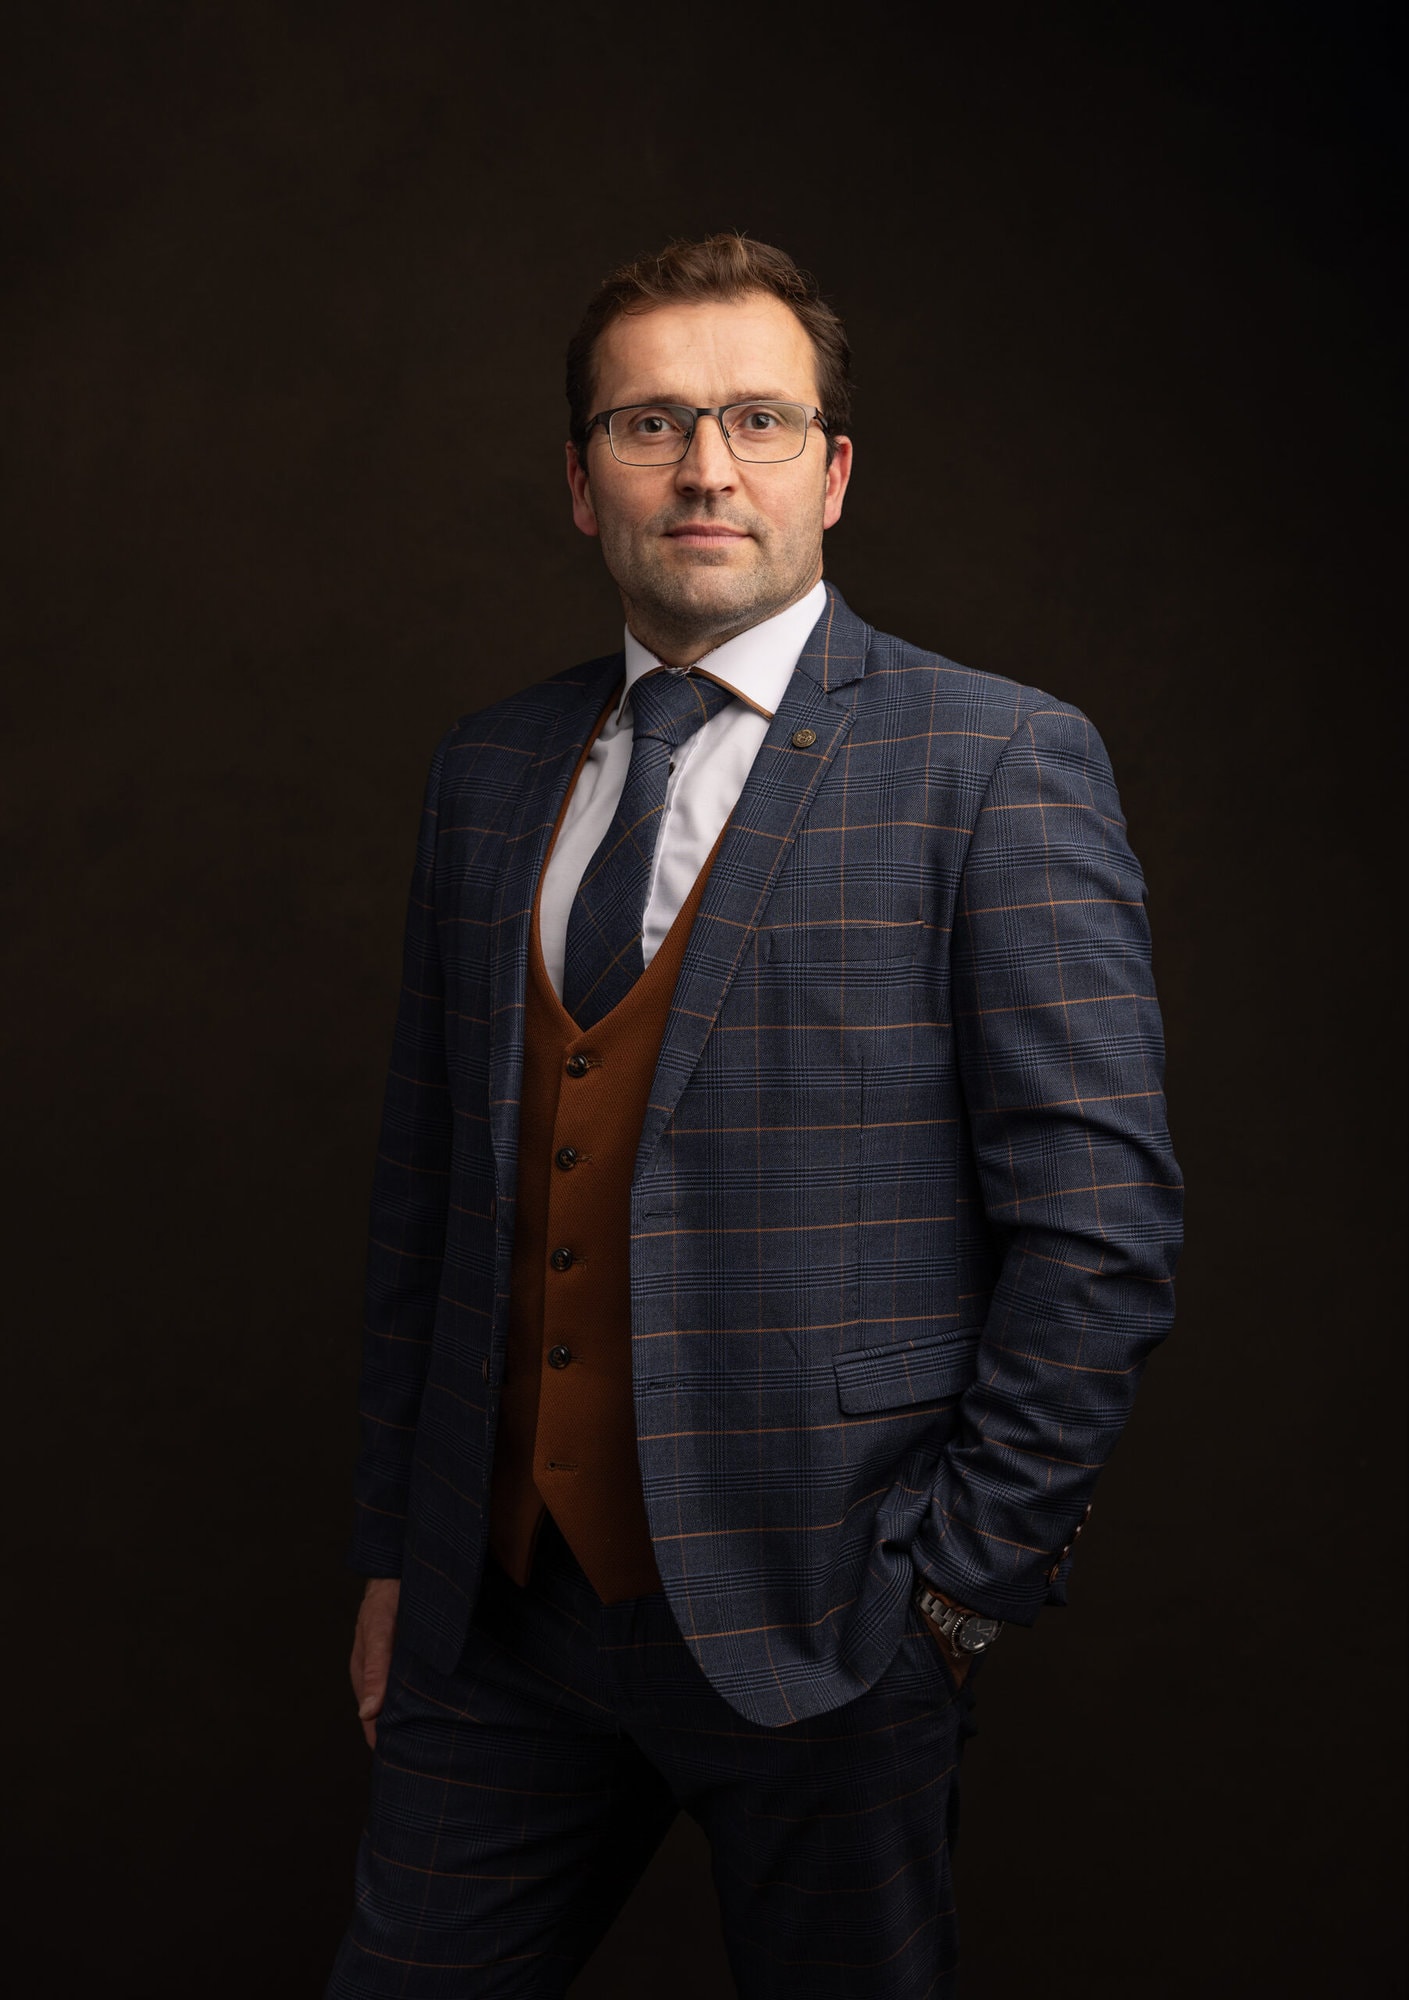 Handsome man with navy and brown checked suit poses for Headshot with Alison McKenny Photography